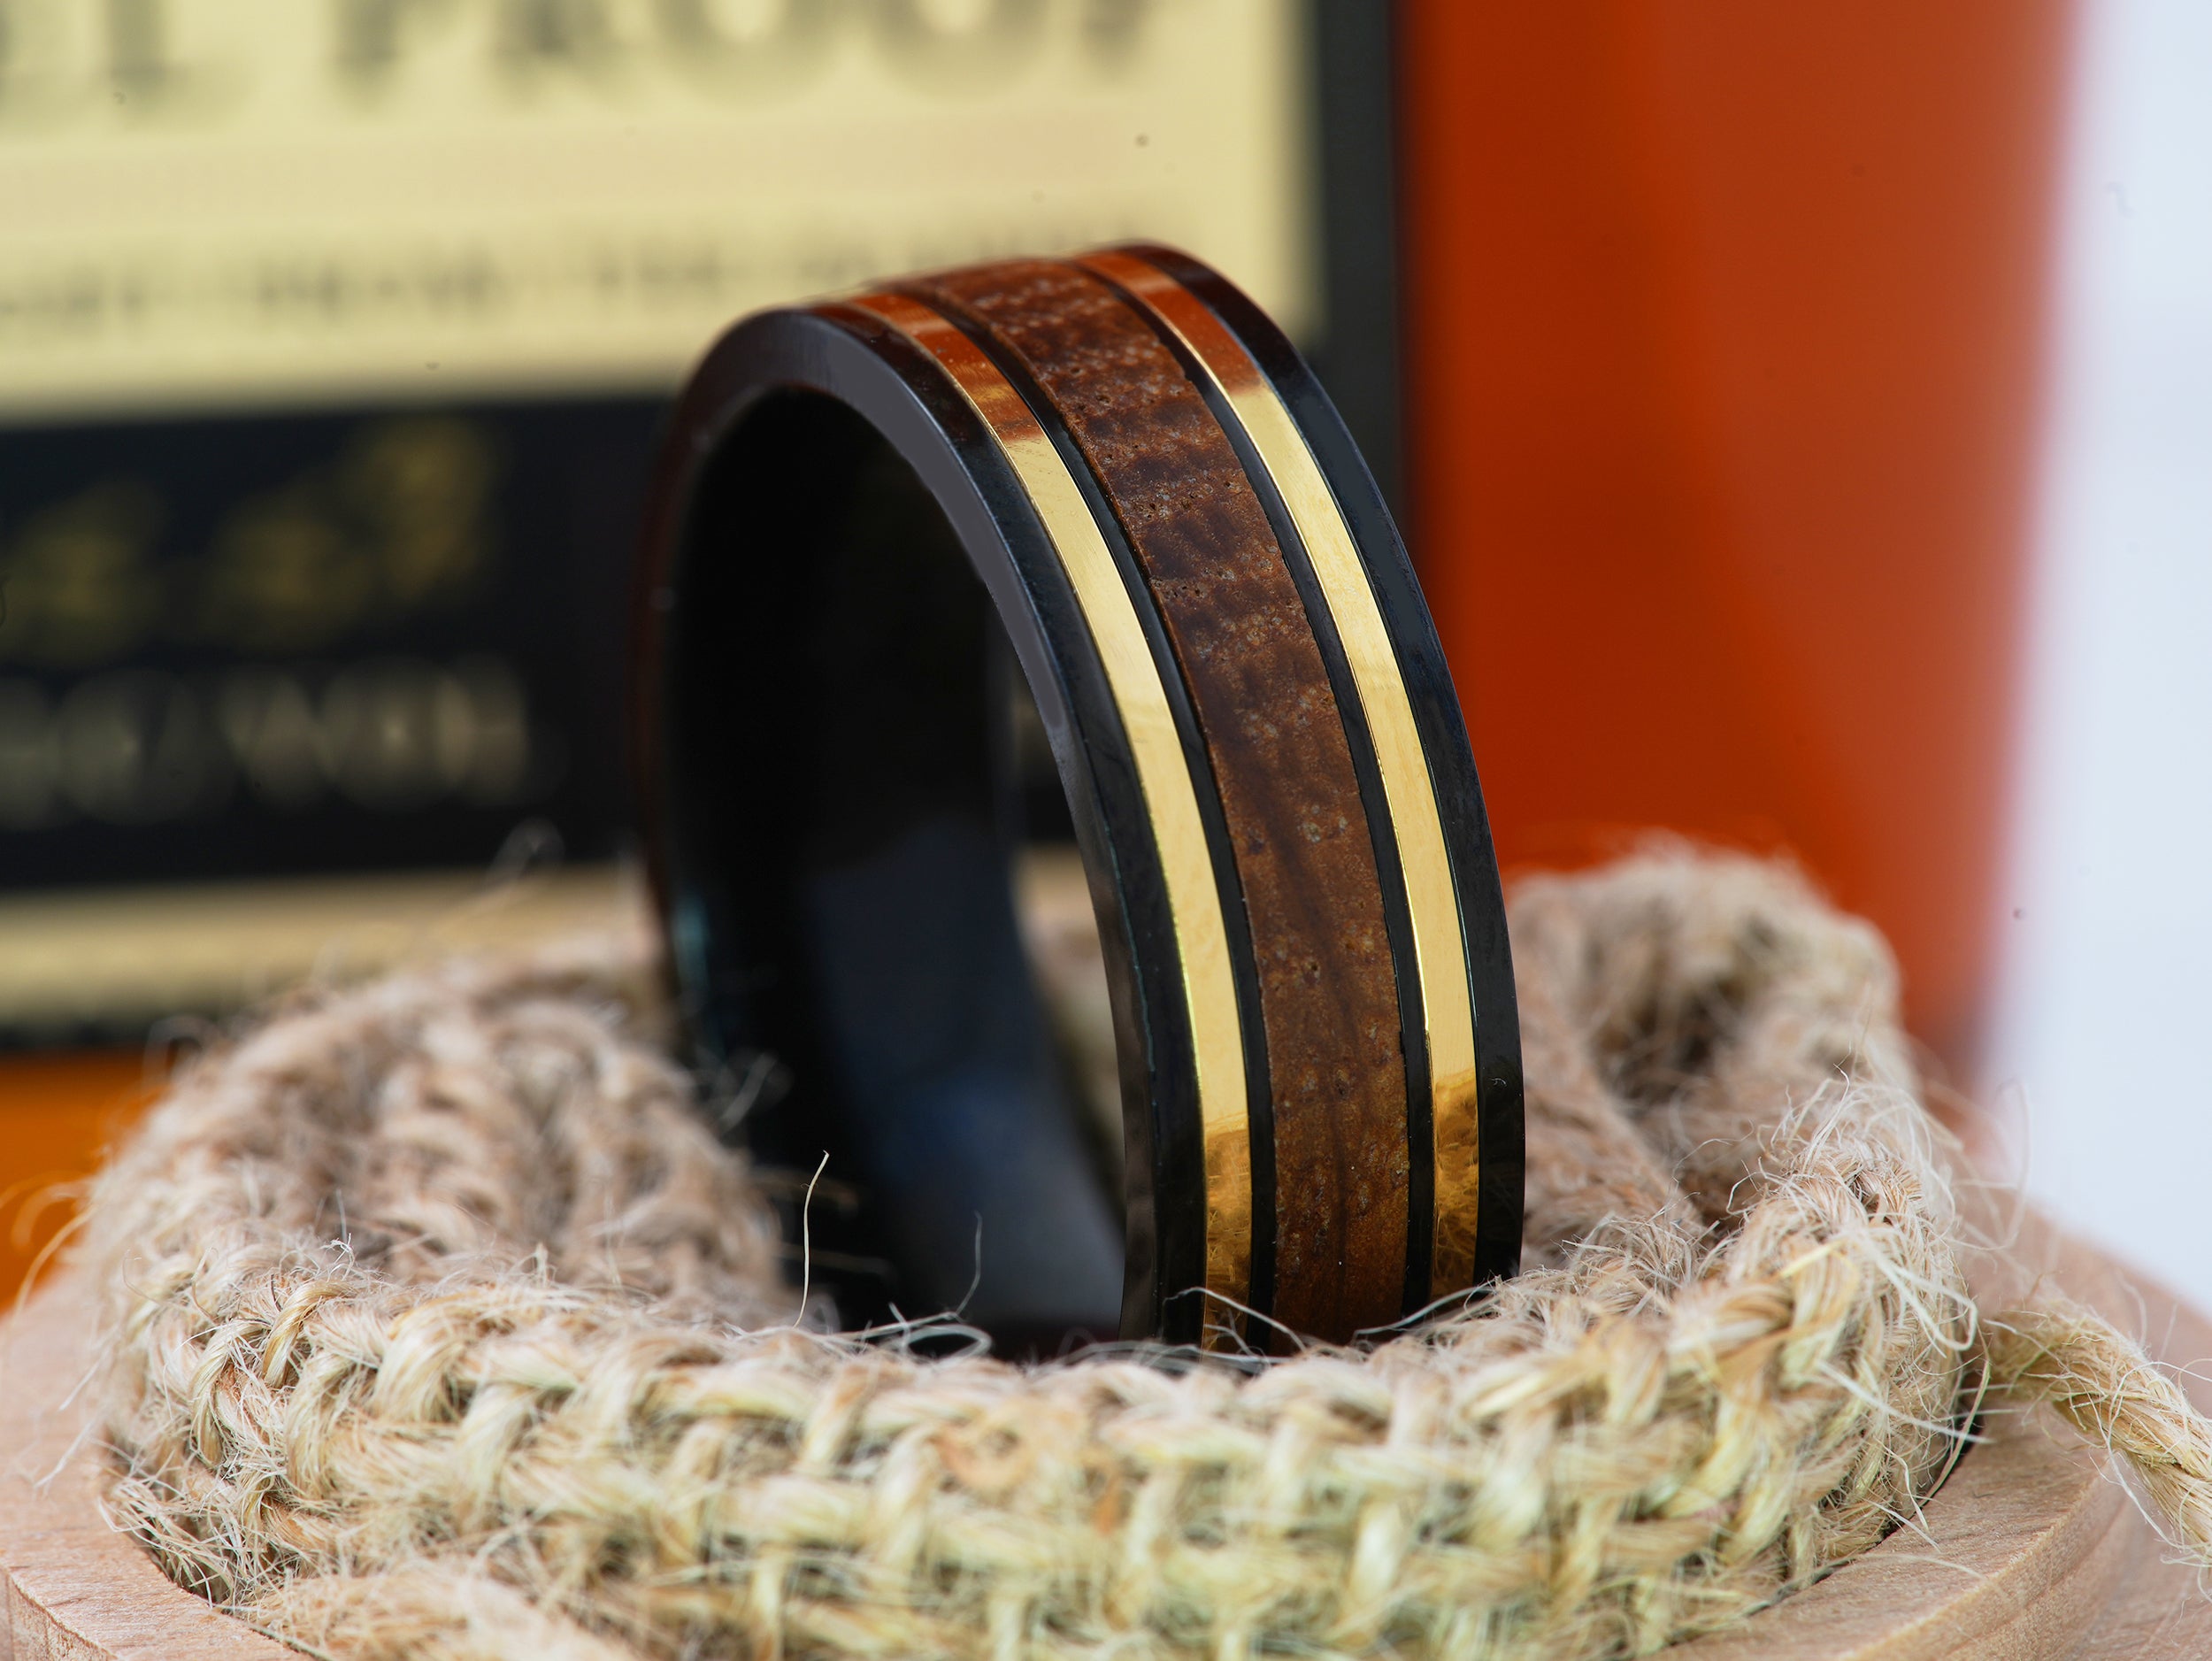 The Castor | Black Titanium Wedding Band with Tennessee Whiskey Barrel Wood Inlay